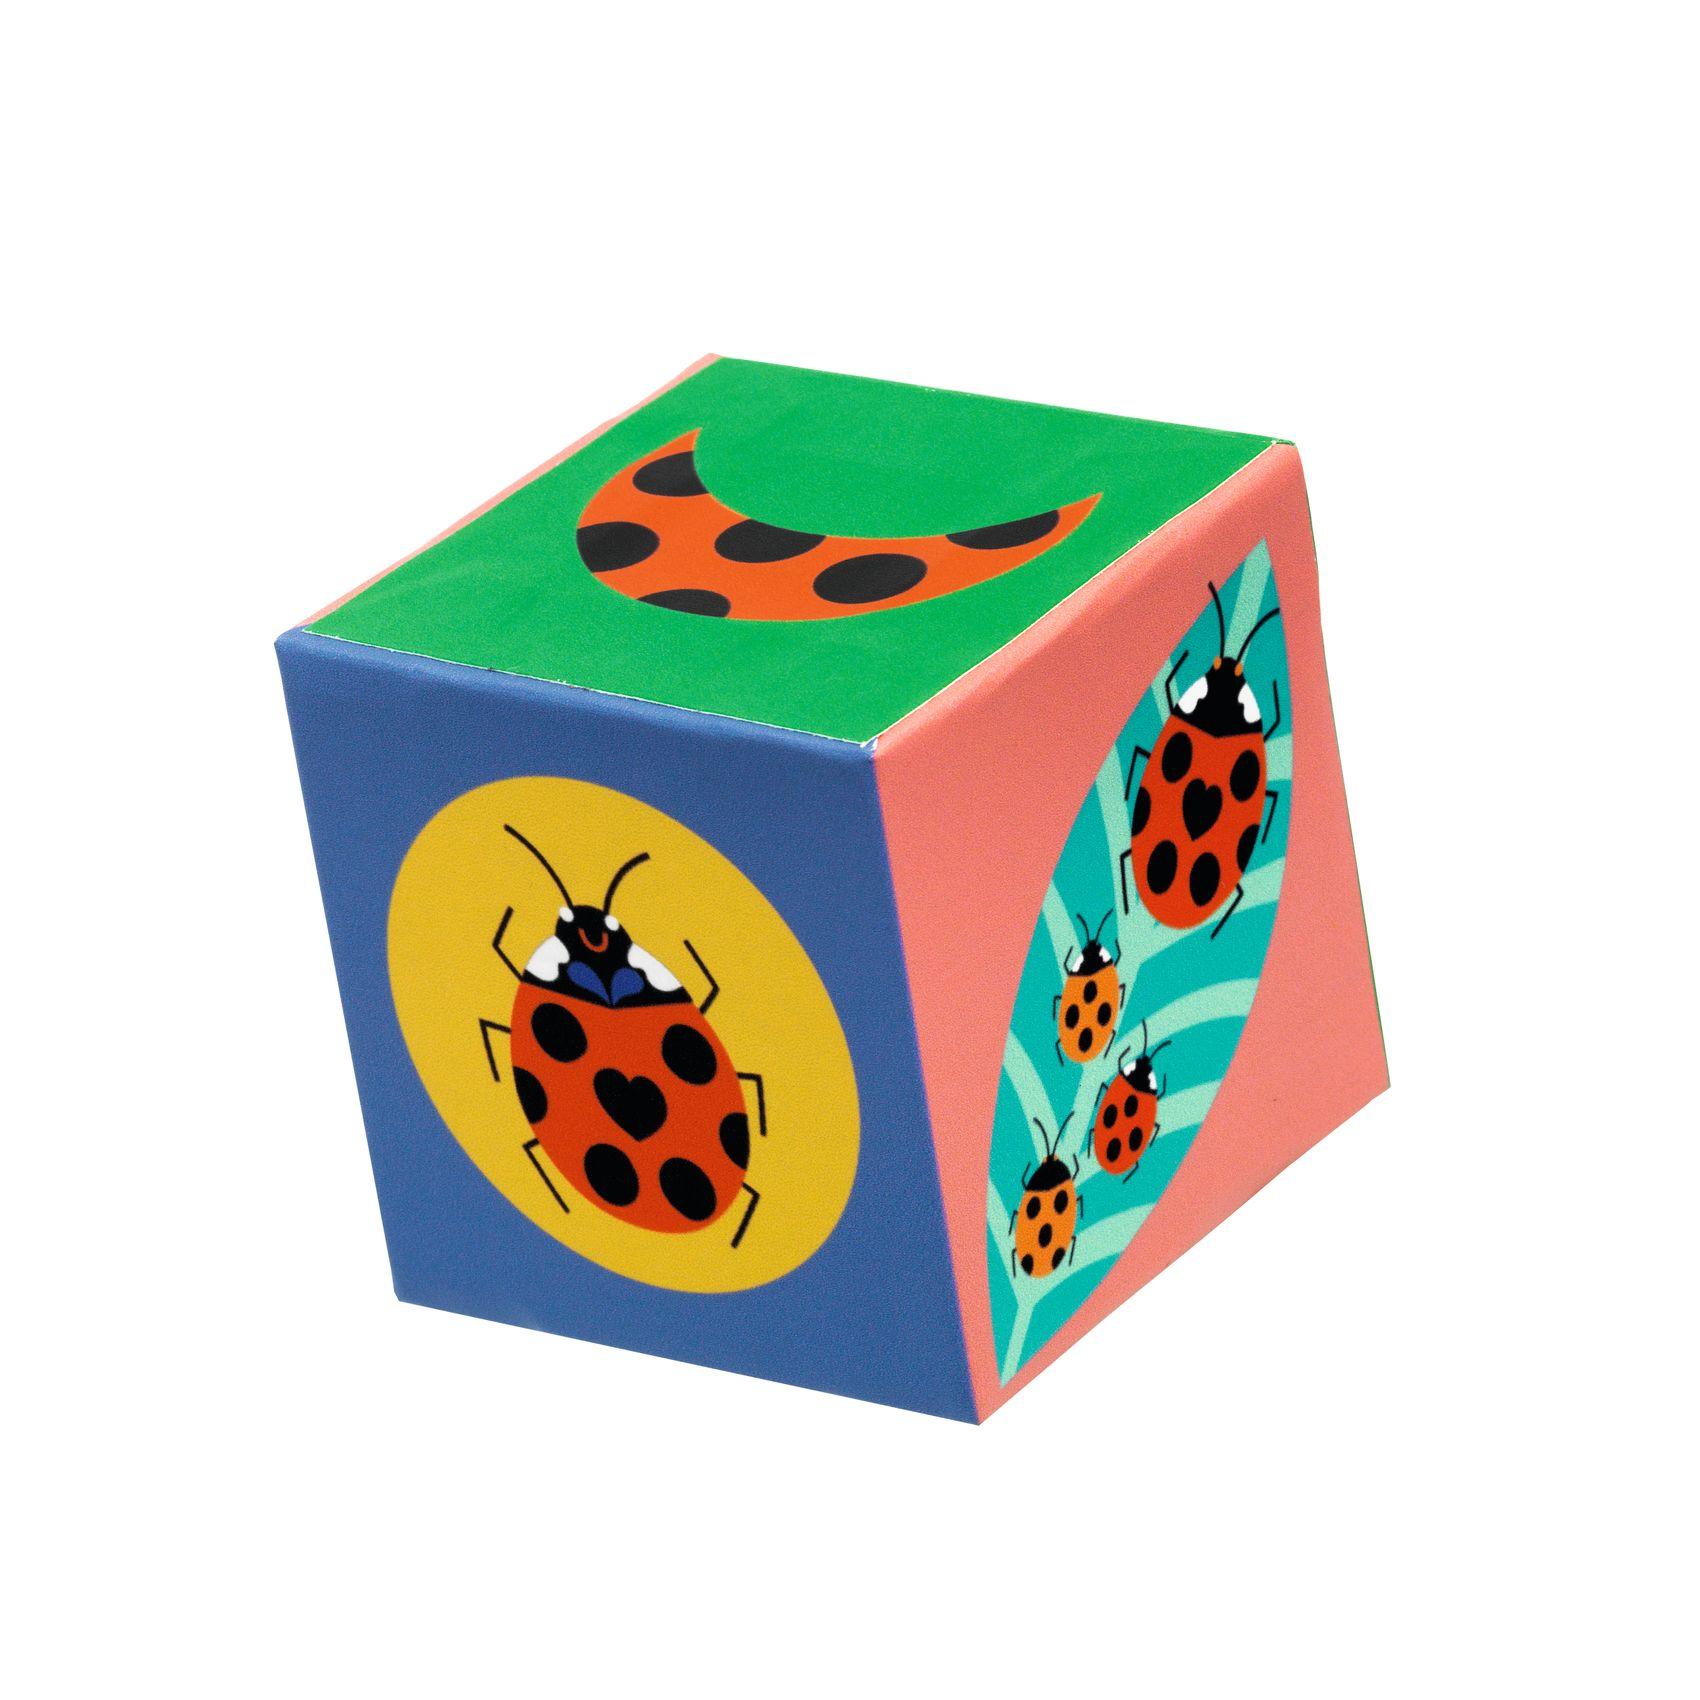 CUBES A EMPILER ANIMAUX SAUVAGES - DJECO